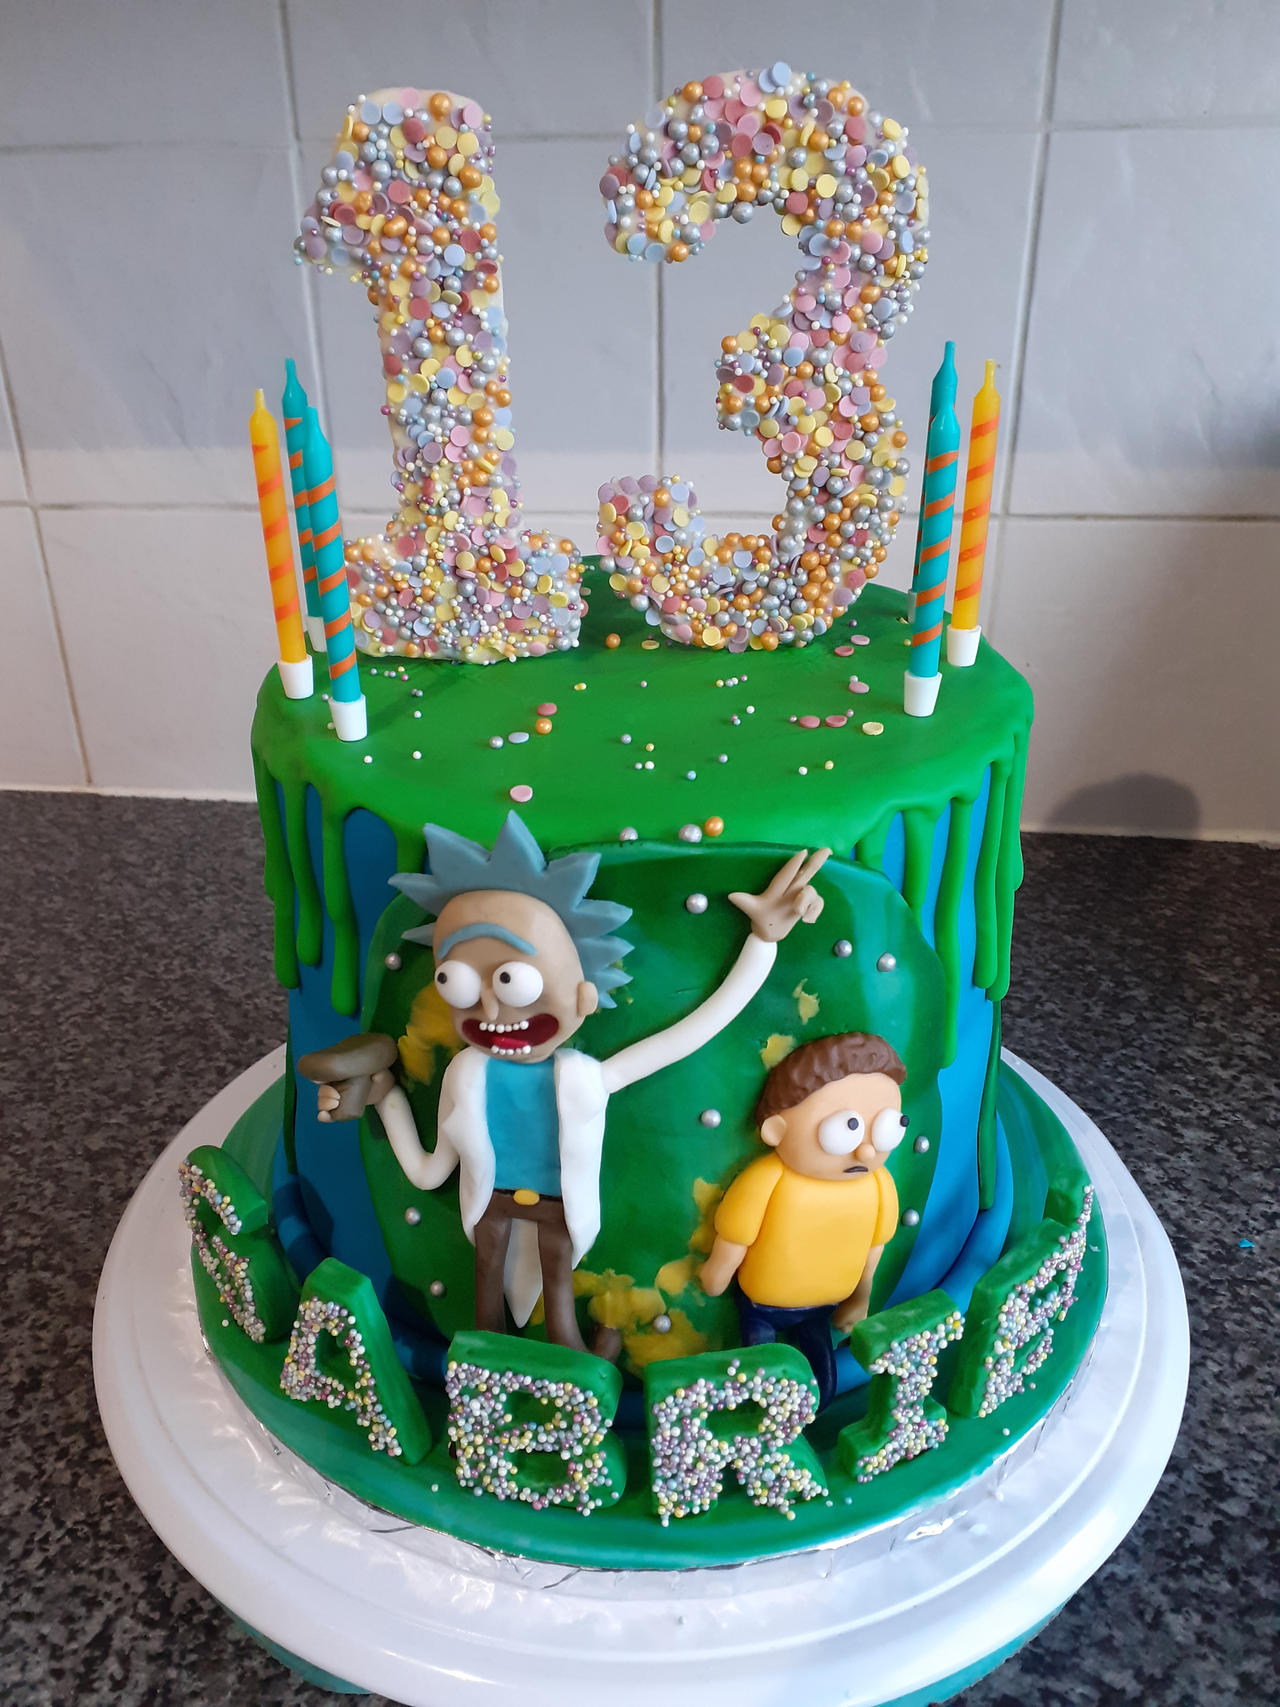 Rick and Morty Cake by clvmoore on DeviantArt